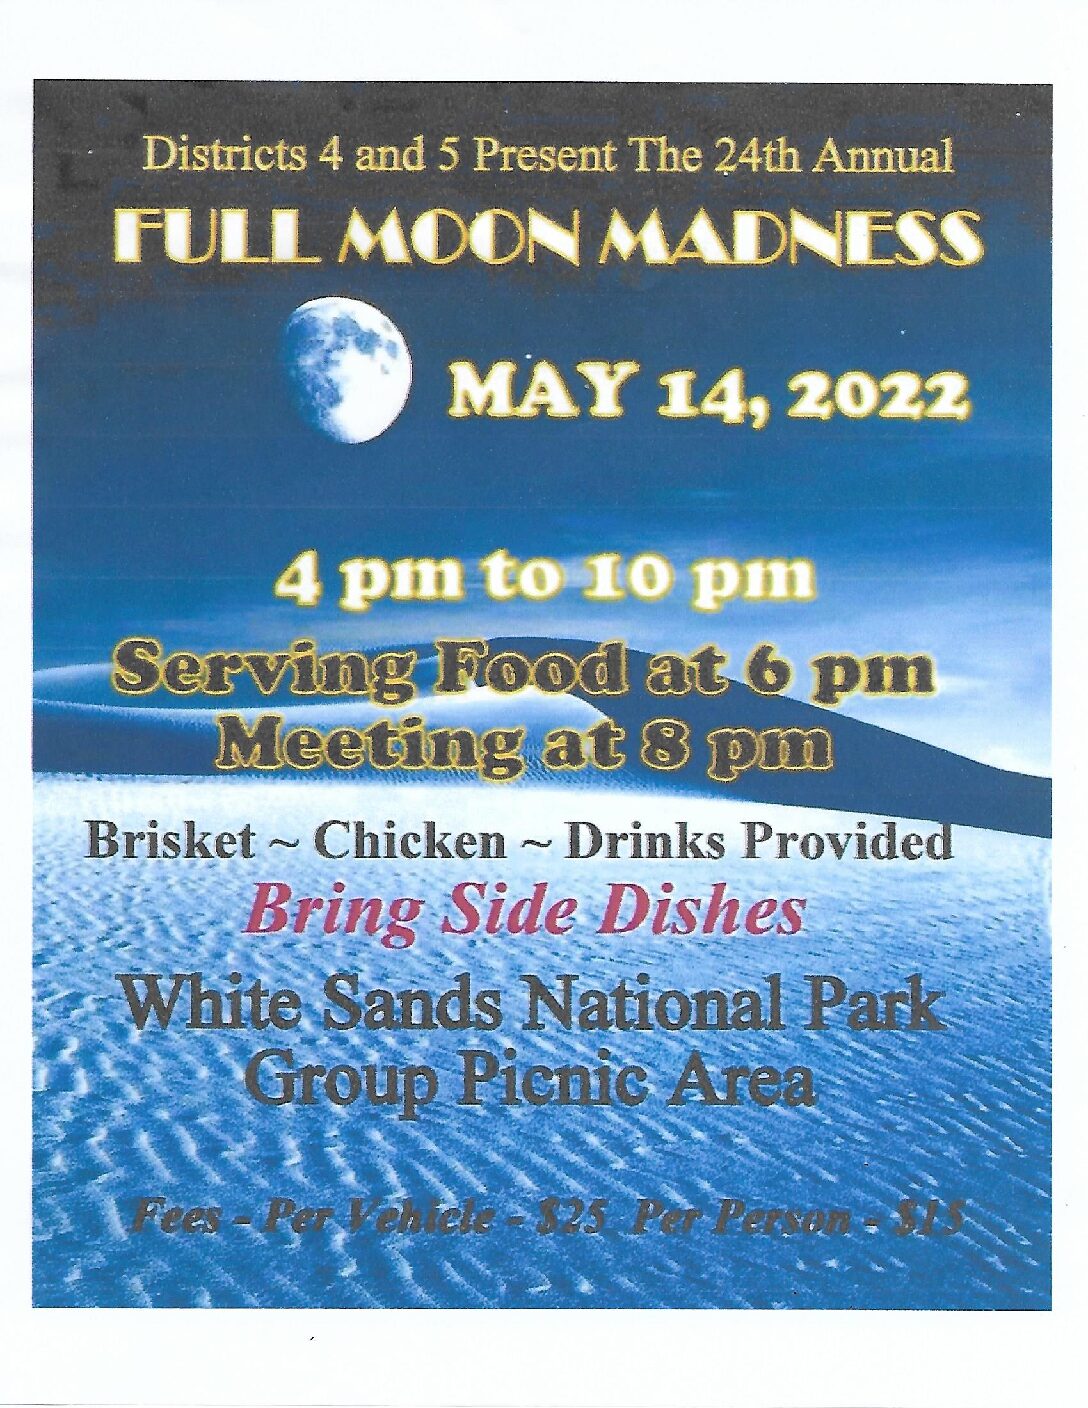 Full Moon Madness at White Sands!